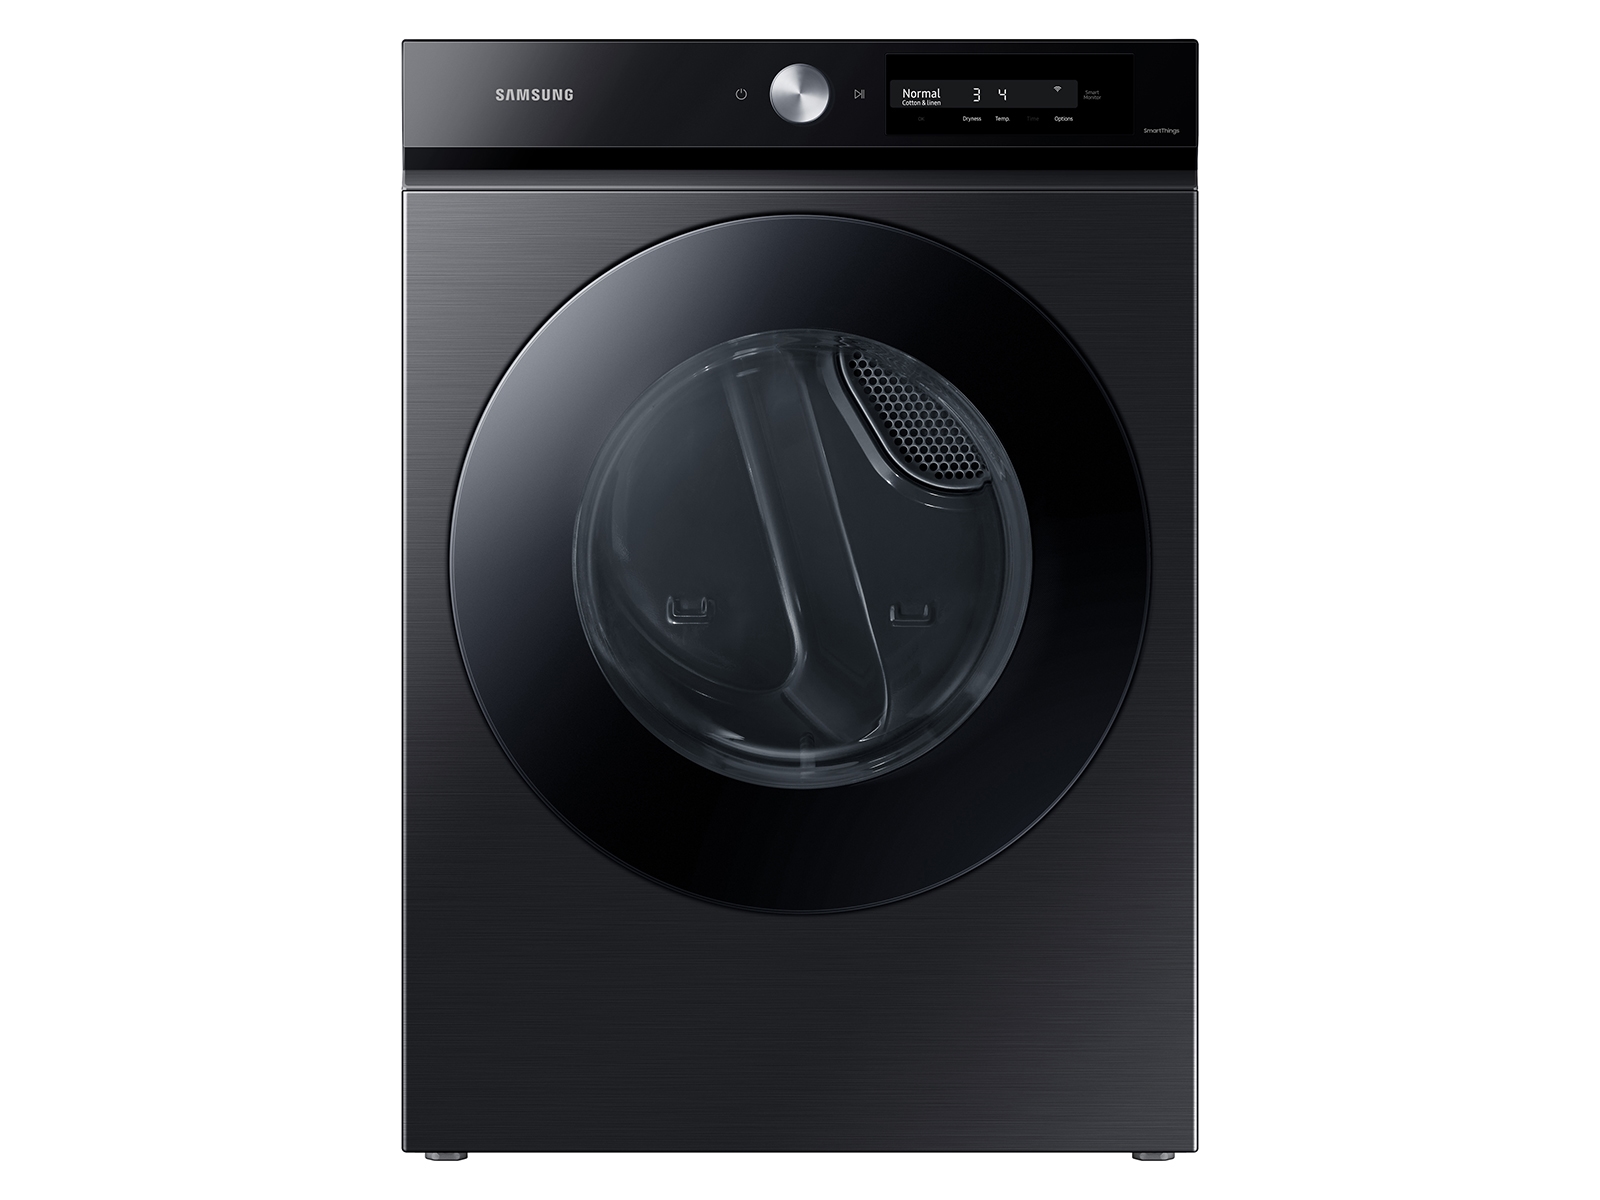 Photos - Tumble Dryer Samsung Bespoke 7.5 cu. ft. Large Capacity Gas Dryer with Super Speed Dry 